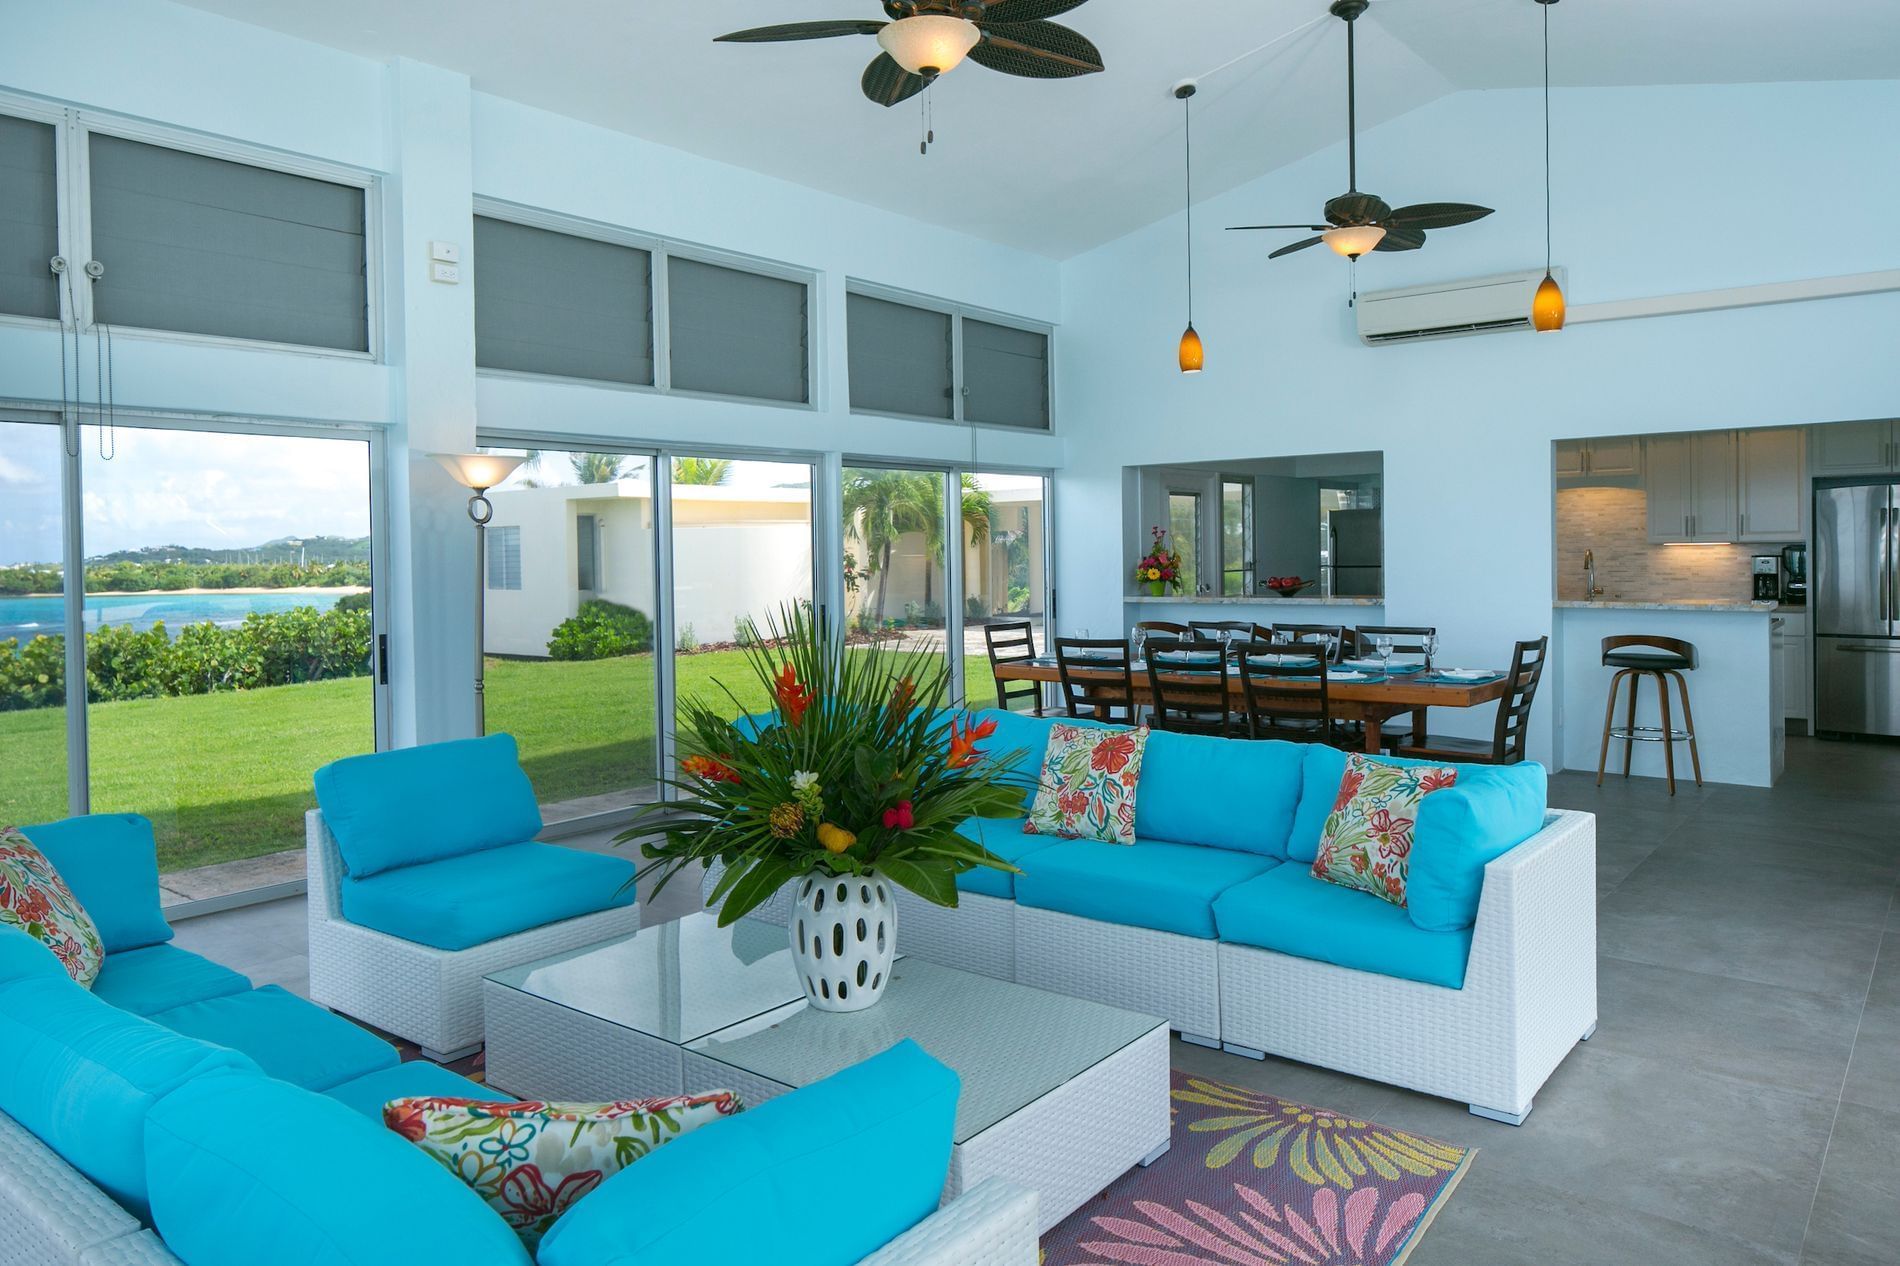 Suite living and dining area with a Sea view at The Buccaneer Resort St. Croix